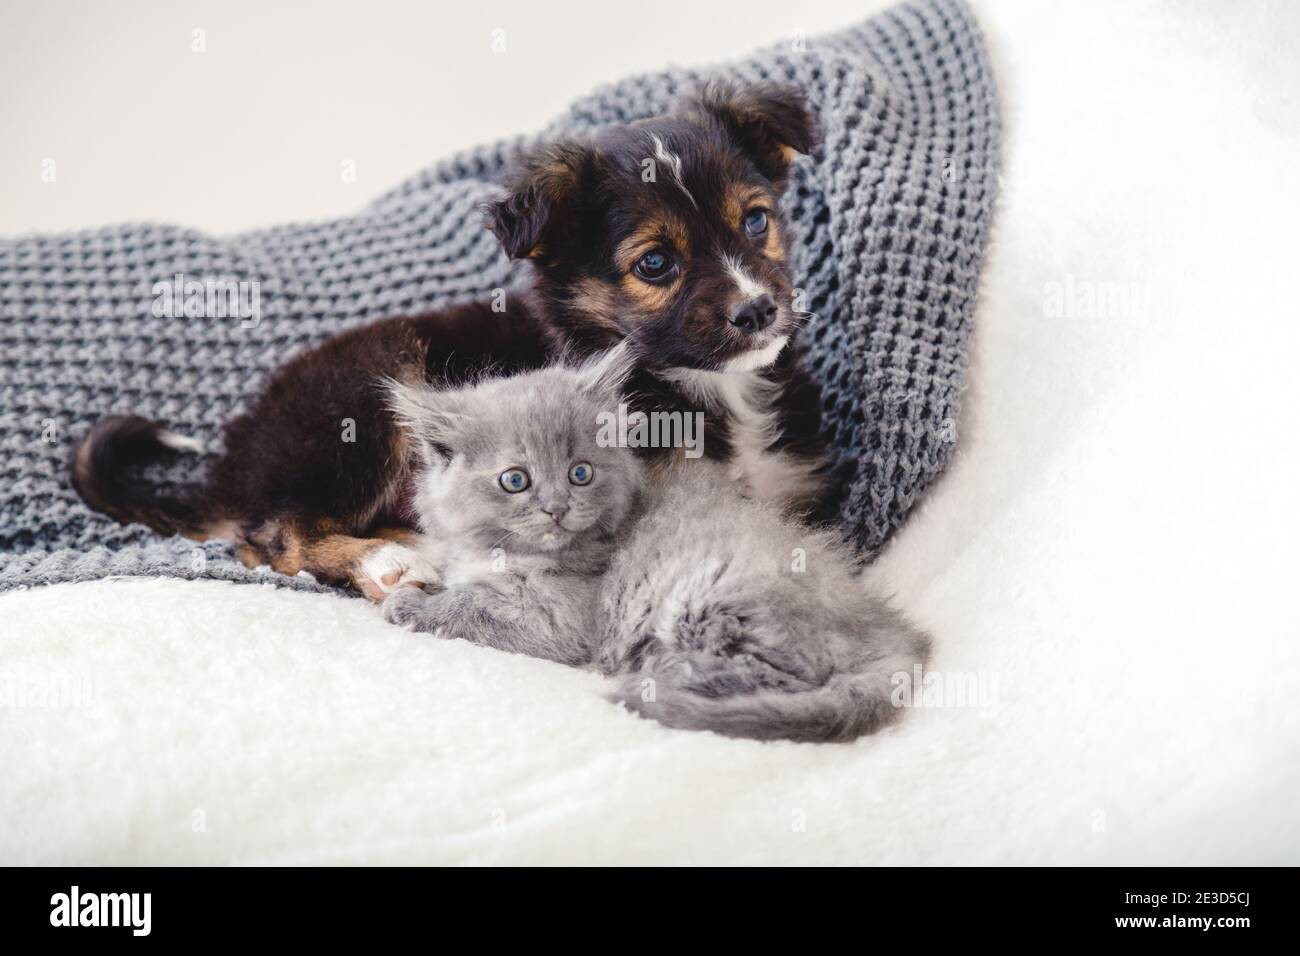 Kitten and puppy. Group of two small animals lie together on bed. Happy gray kitten and black puppy on white blanket at home. Cat dog friends Stock Photo